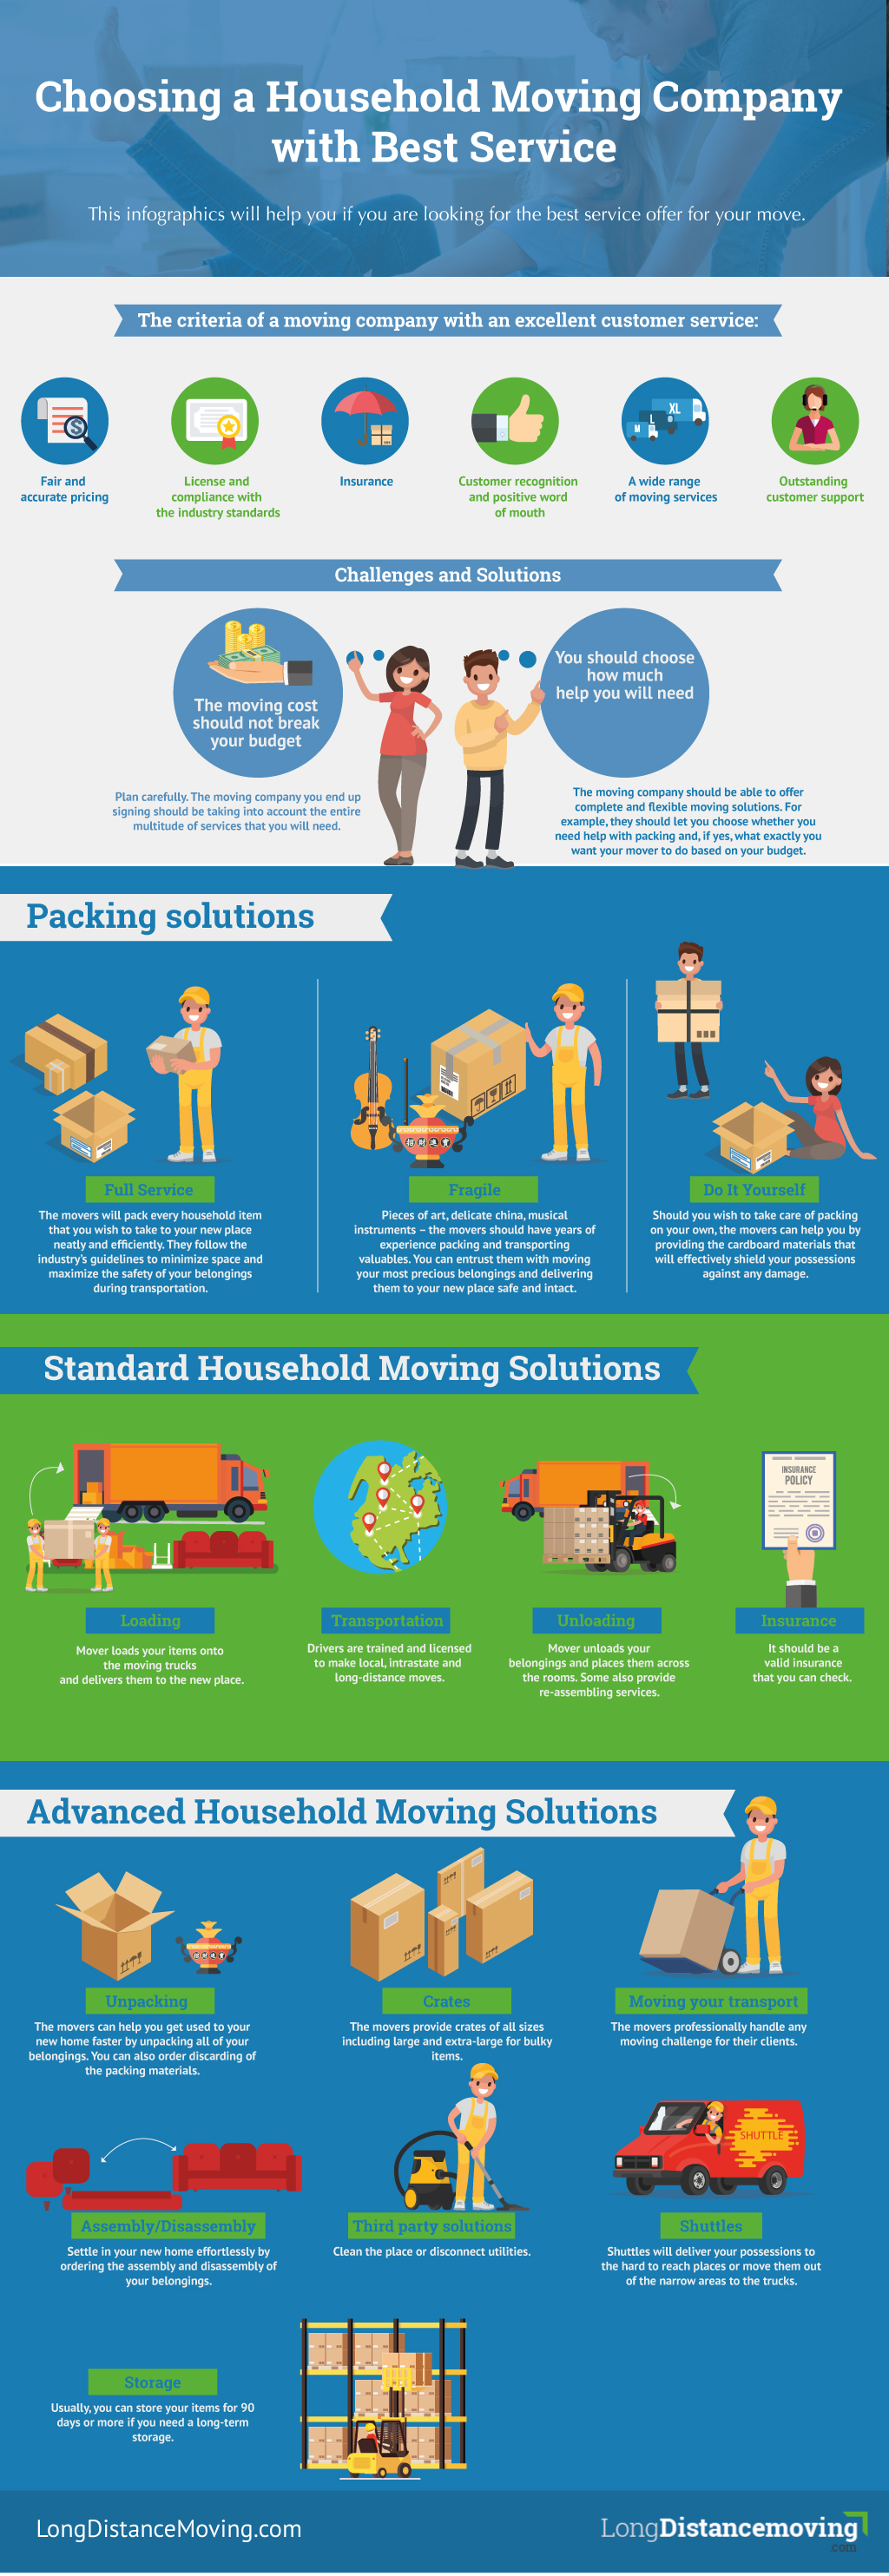 How to choose a household moving company - Infographics